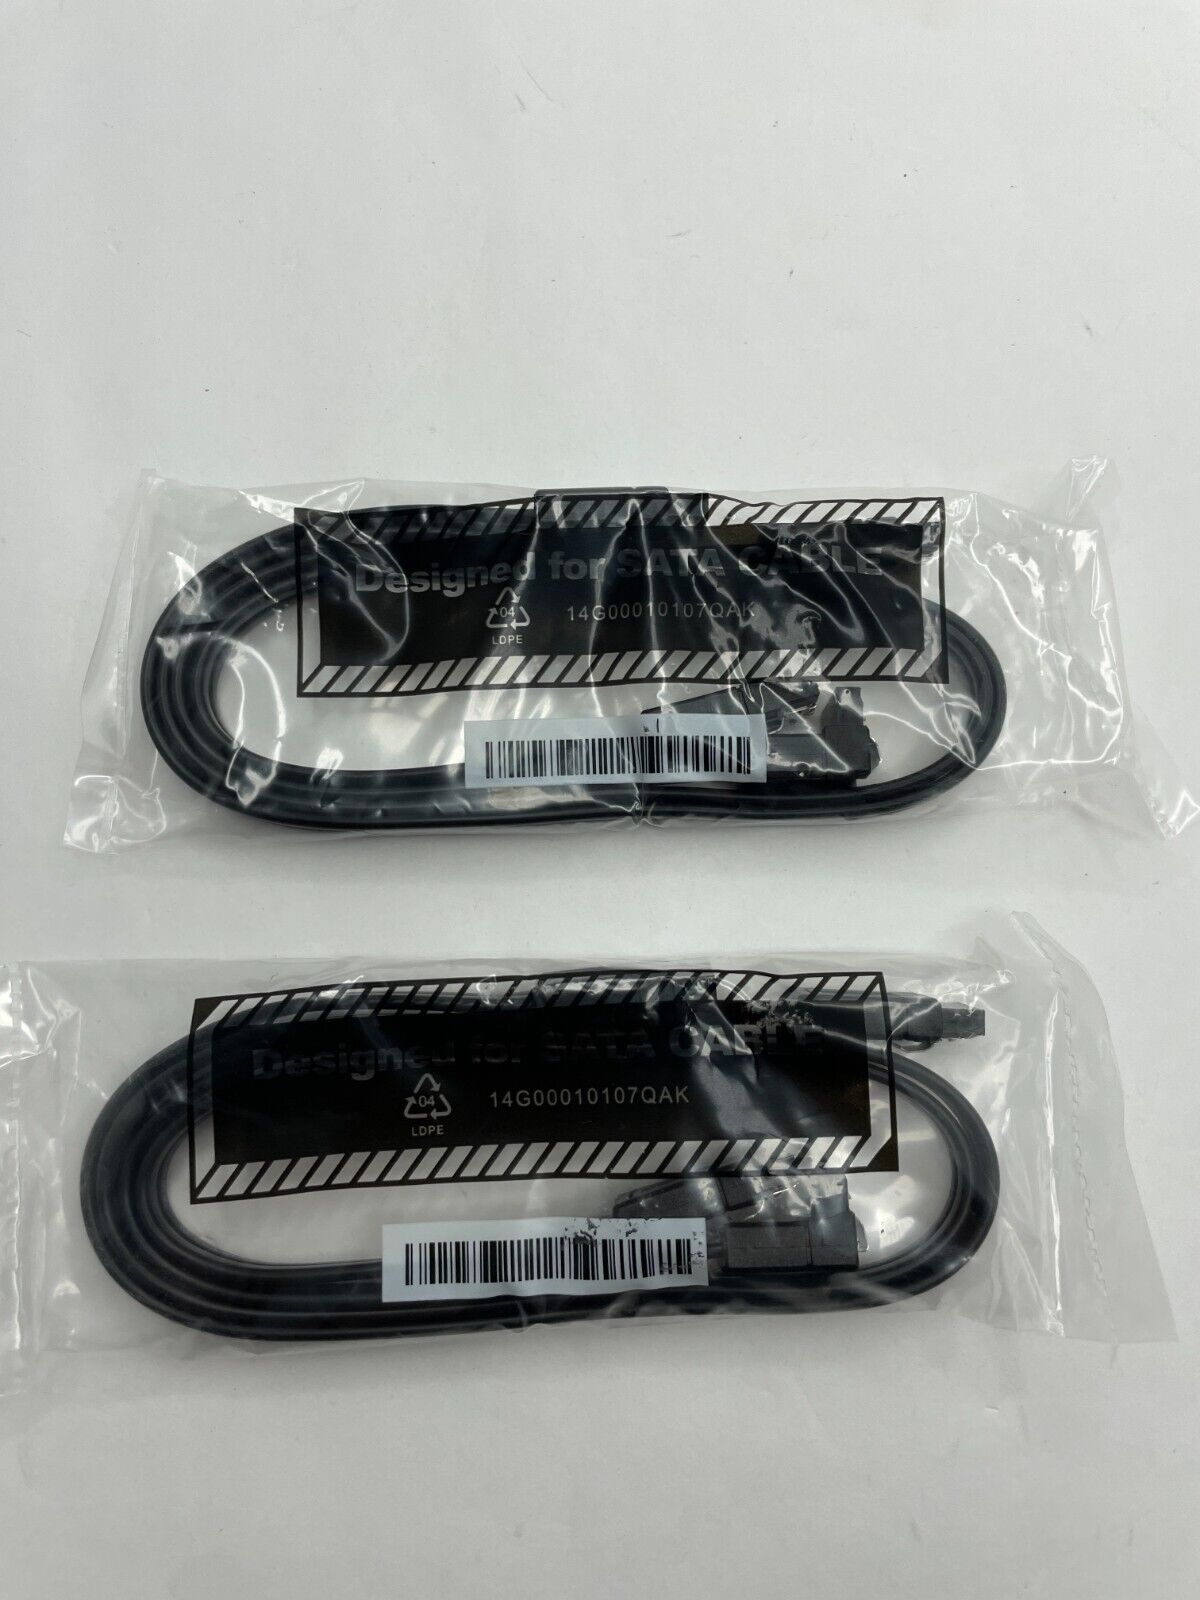 Genuine NZXT and Rock X570 Steel Legend SATA cables